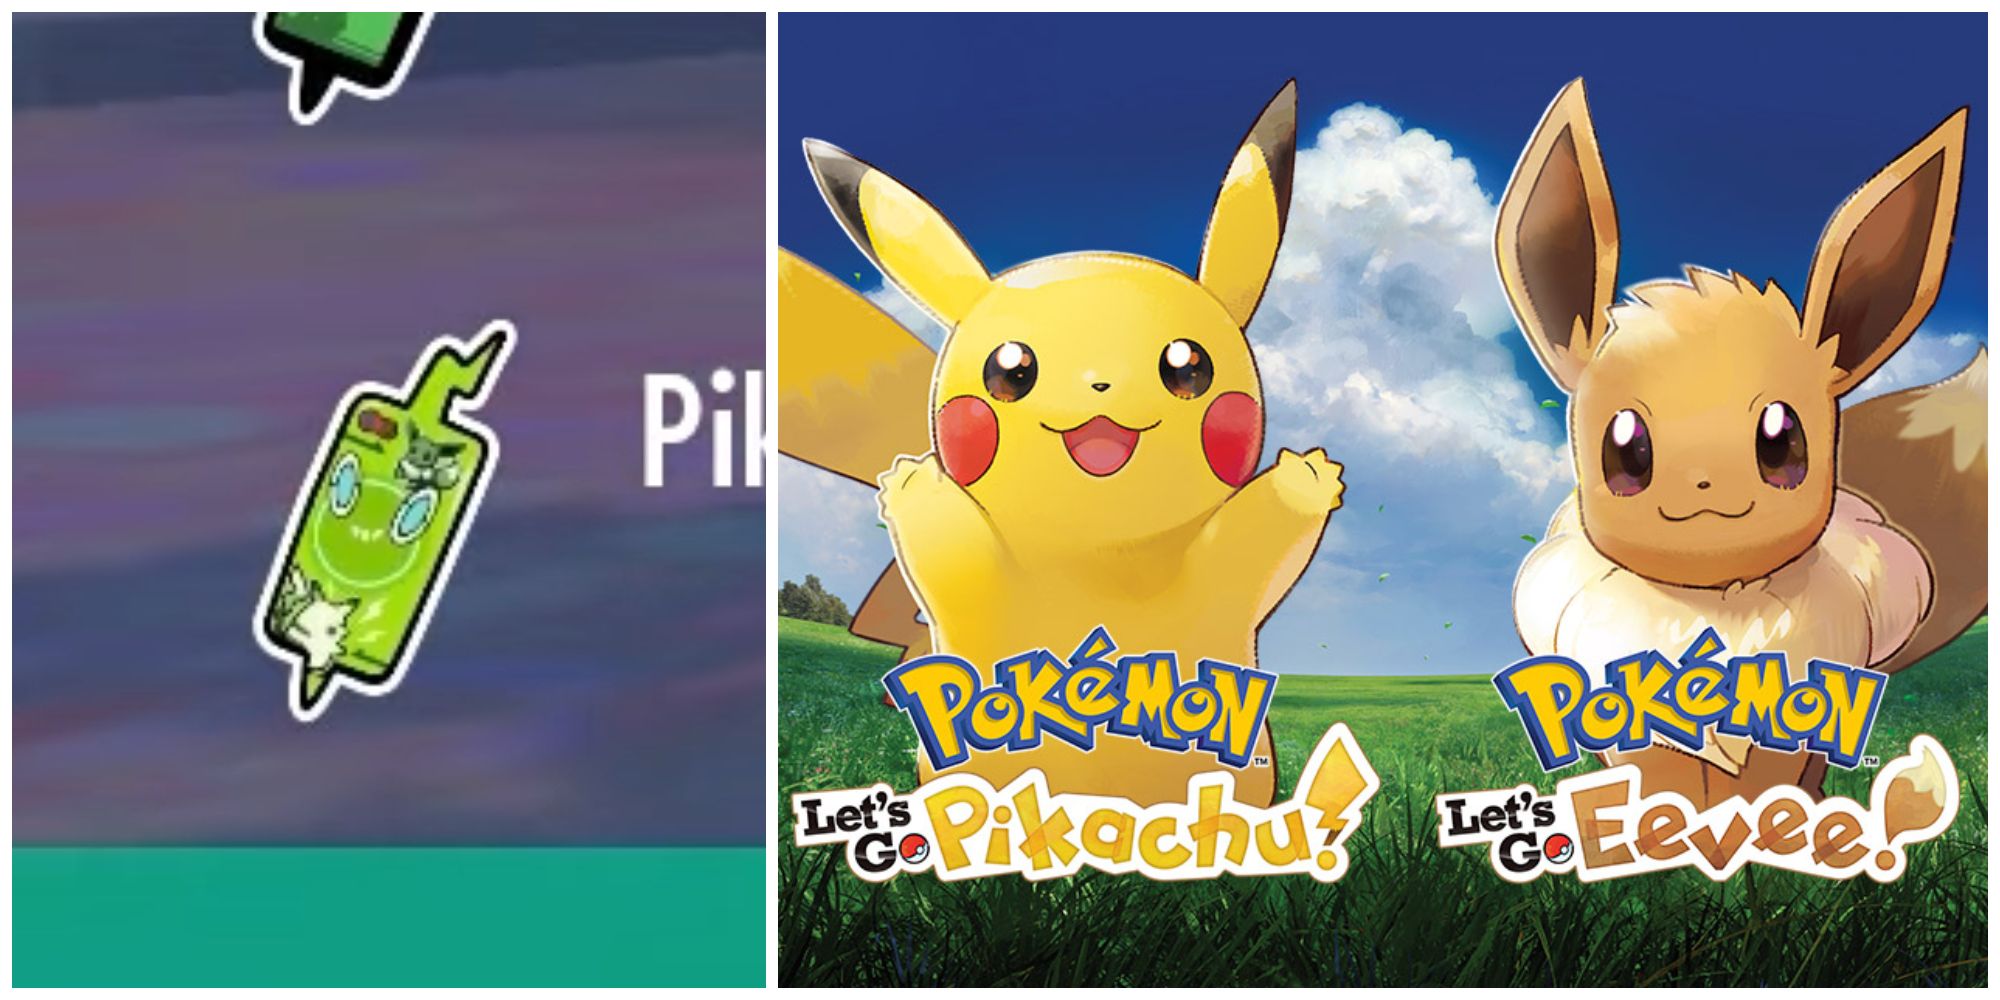 Split image of the Pika-Vee Case in Pokemon Scarlet & Violet and the cover art for Let's Go, Pikachu and Let's Go, Eevee.